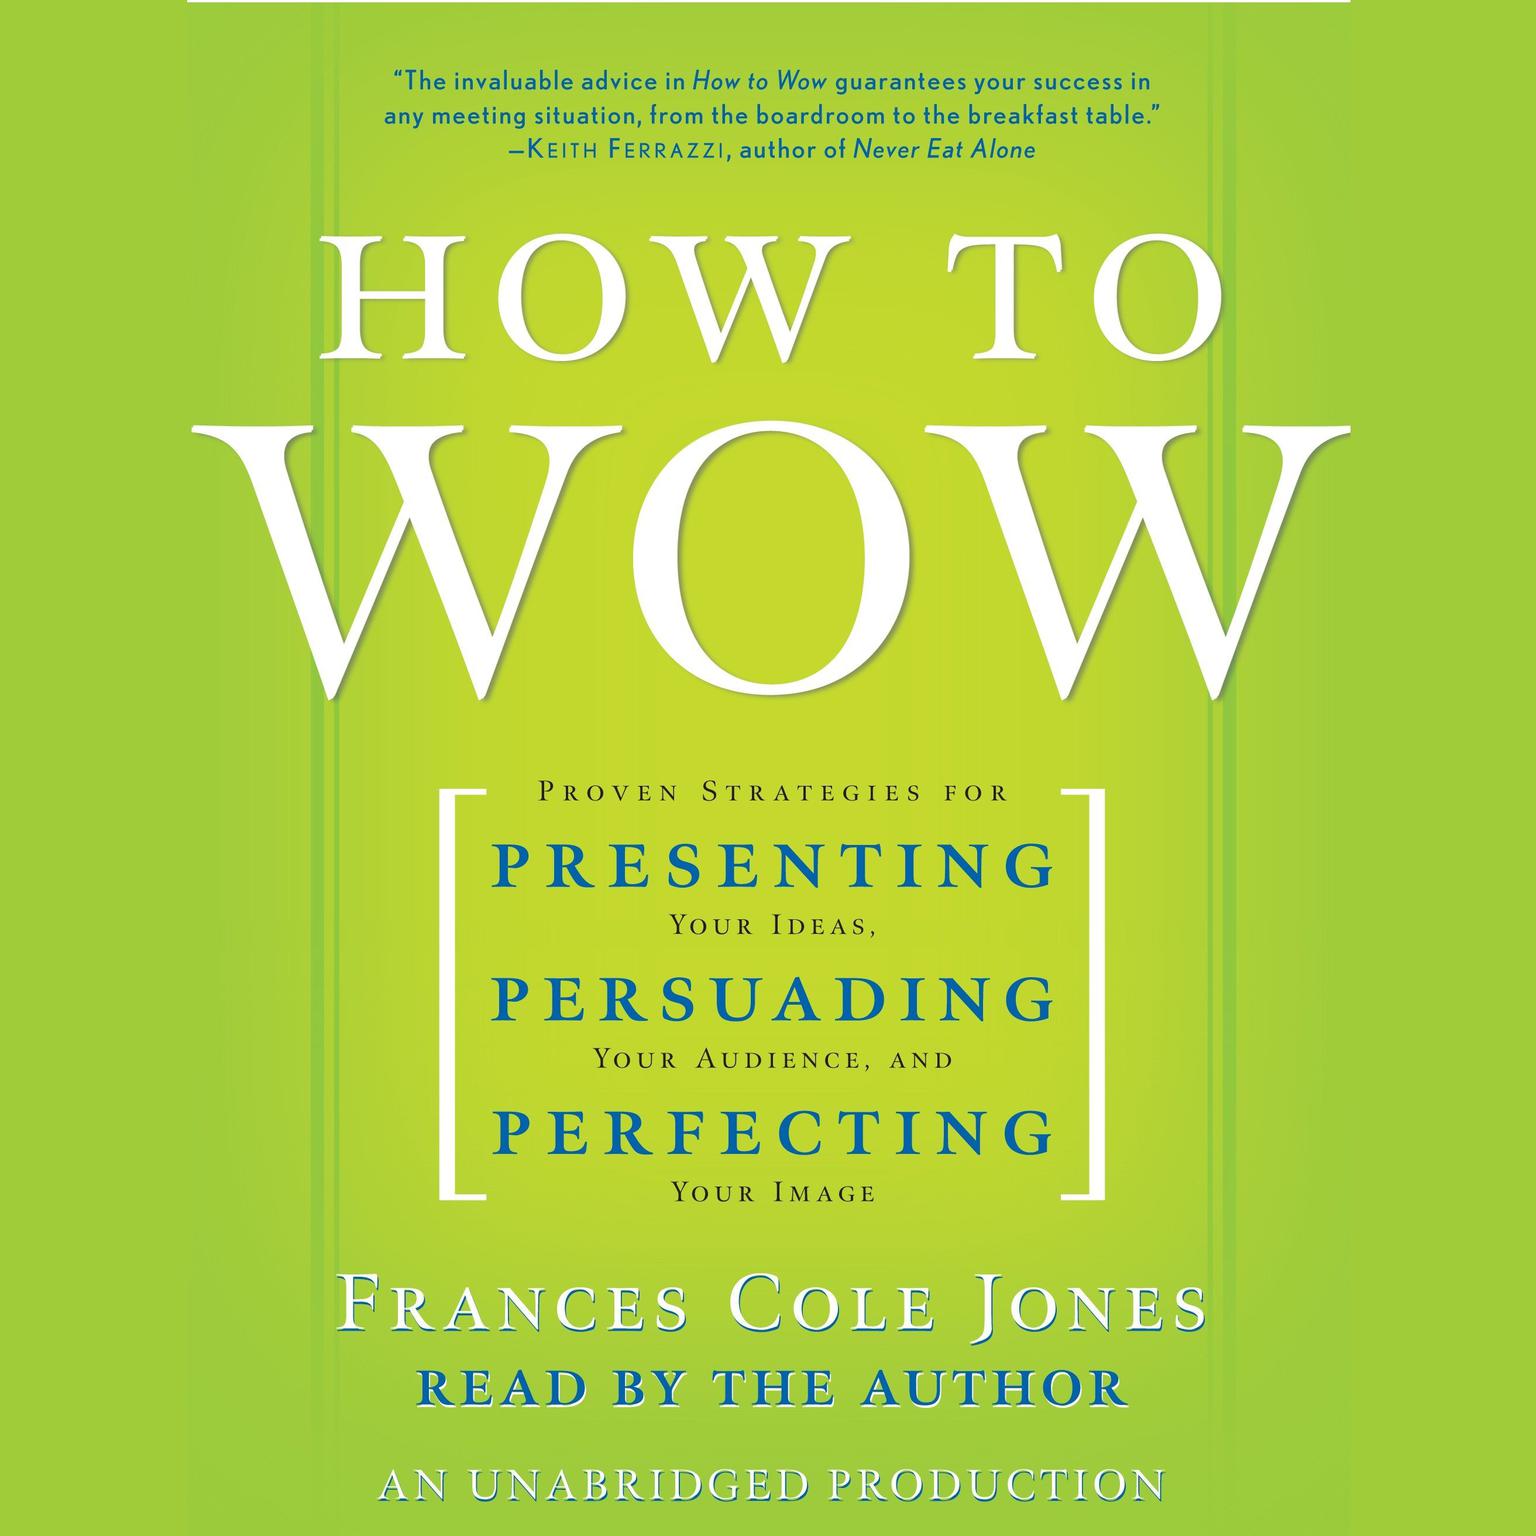 How to Wow: Proven Strategies for Presenting Your Ideas, Persuading Your Audience, and Perfecting Your Image Audiobook, by Frances Cole Jones